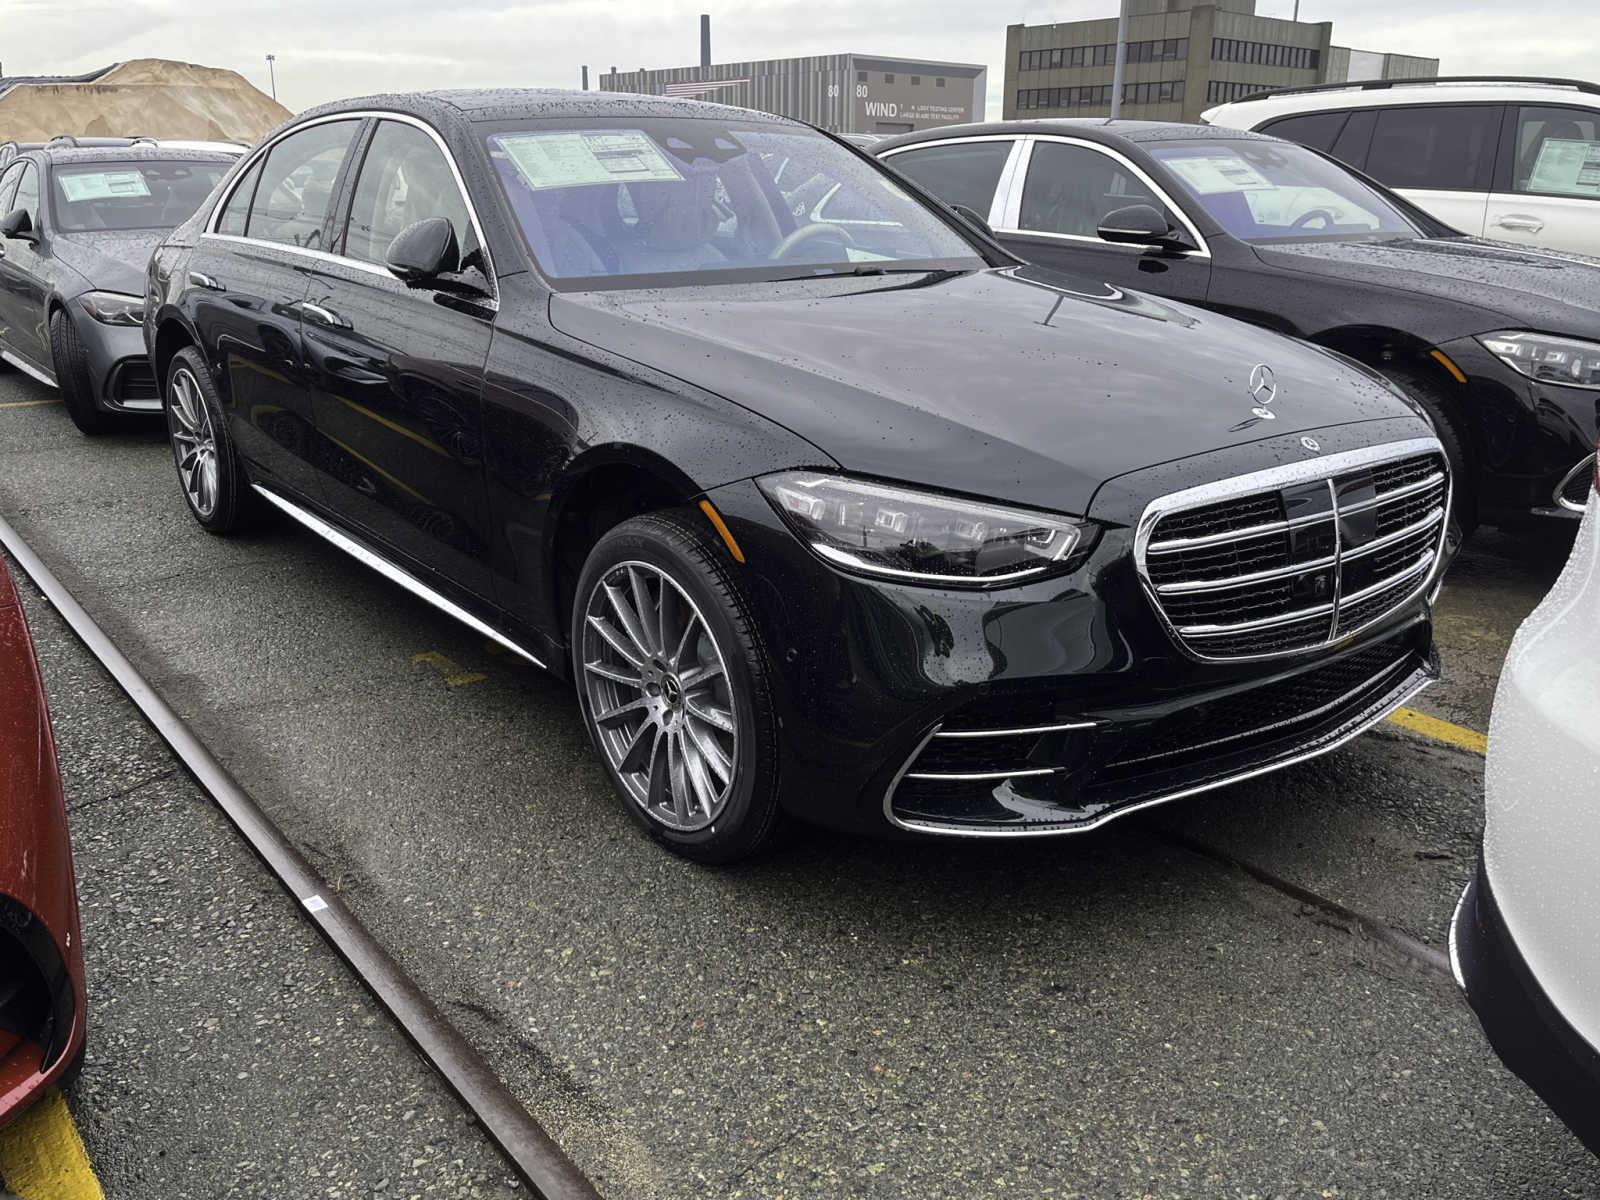 Mercedes-Benz S-Class Lease Offers in Boston, MA | Lease From 